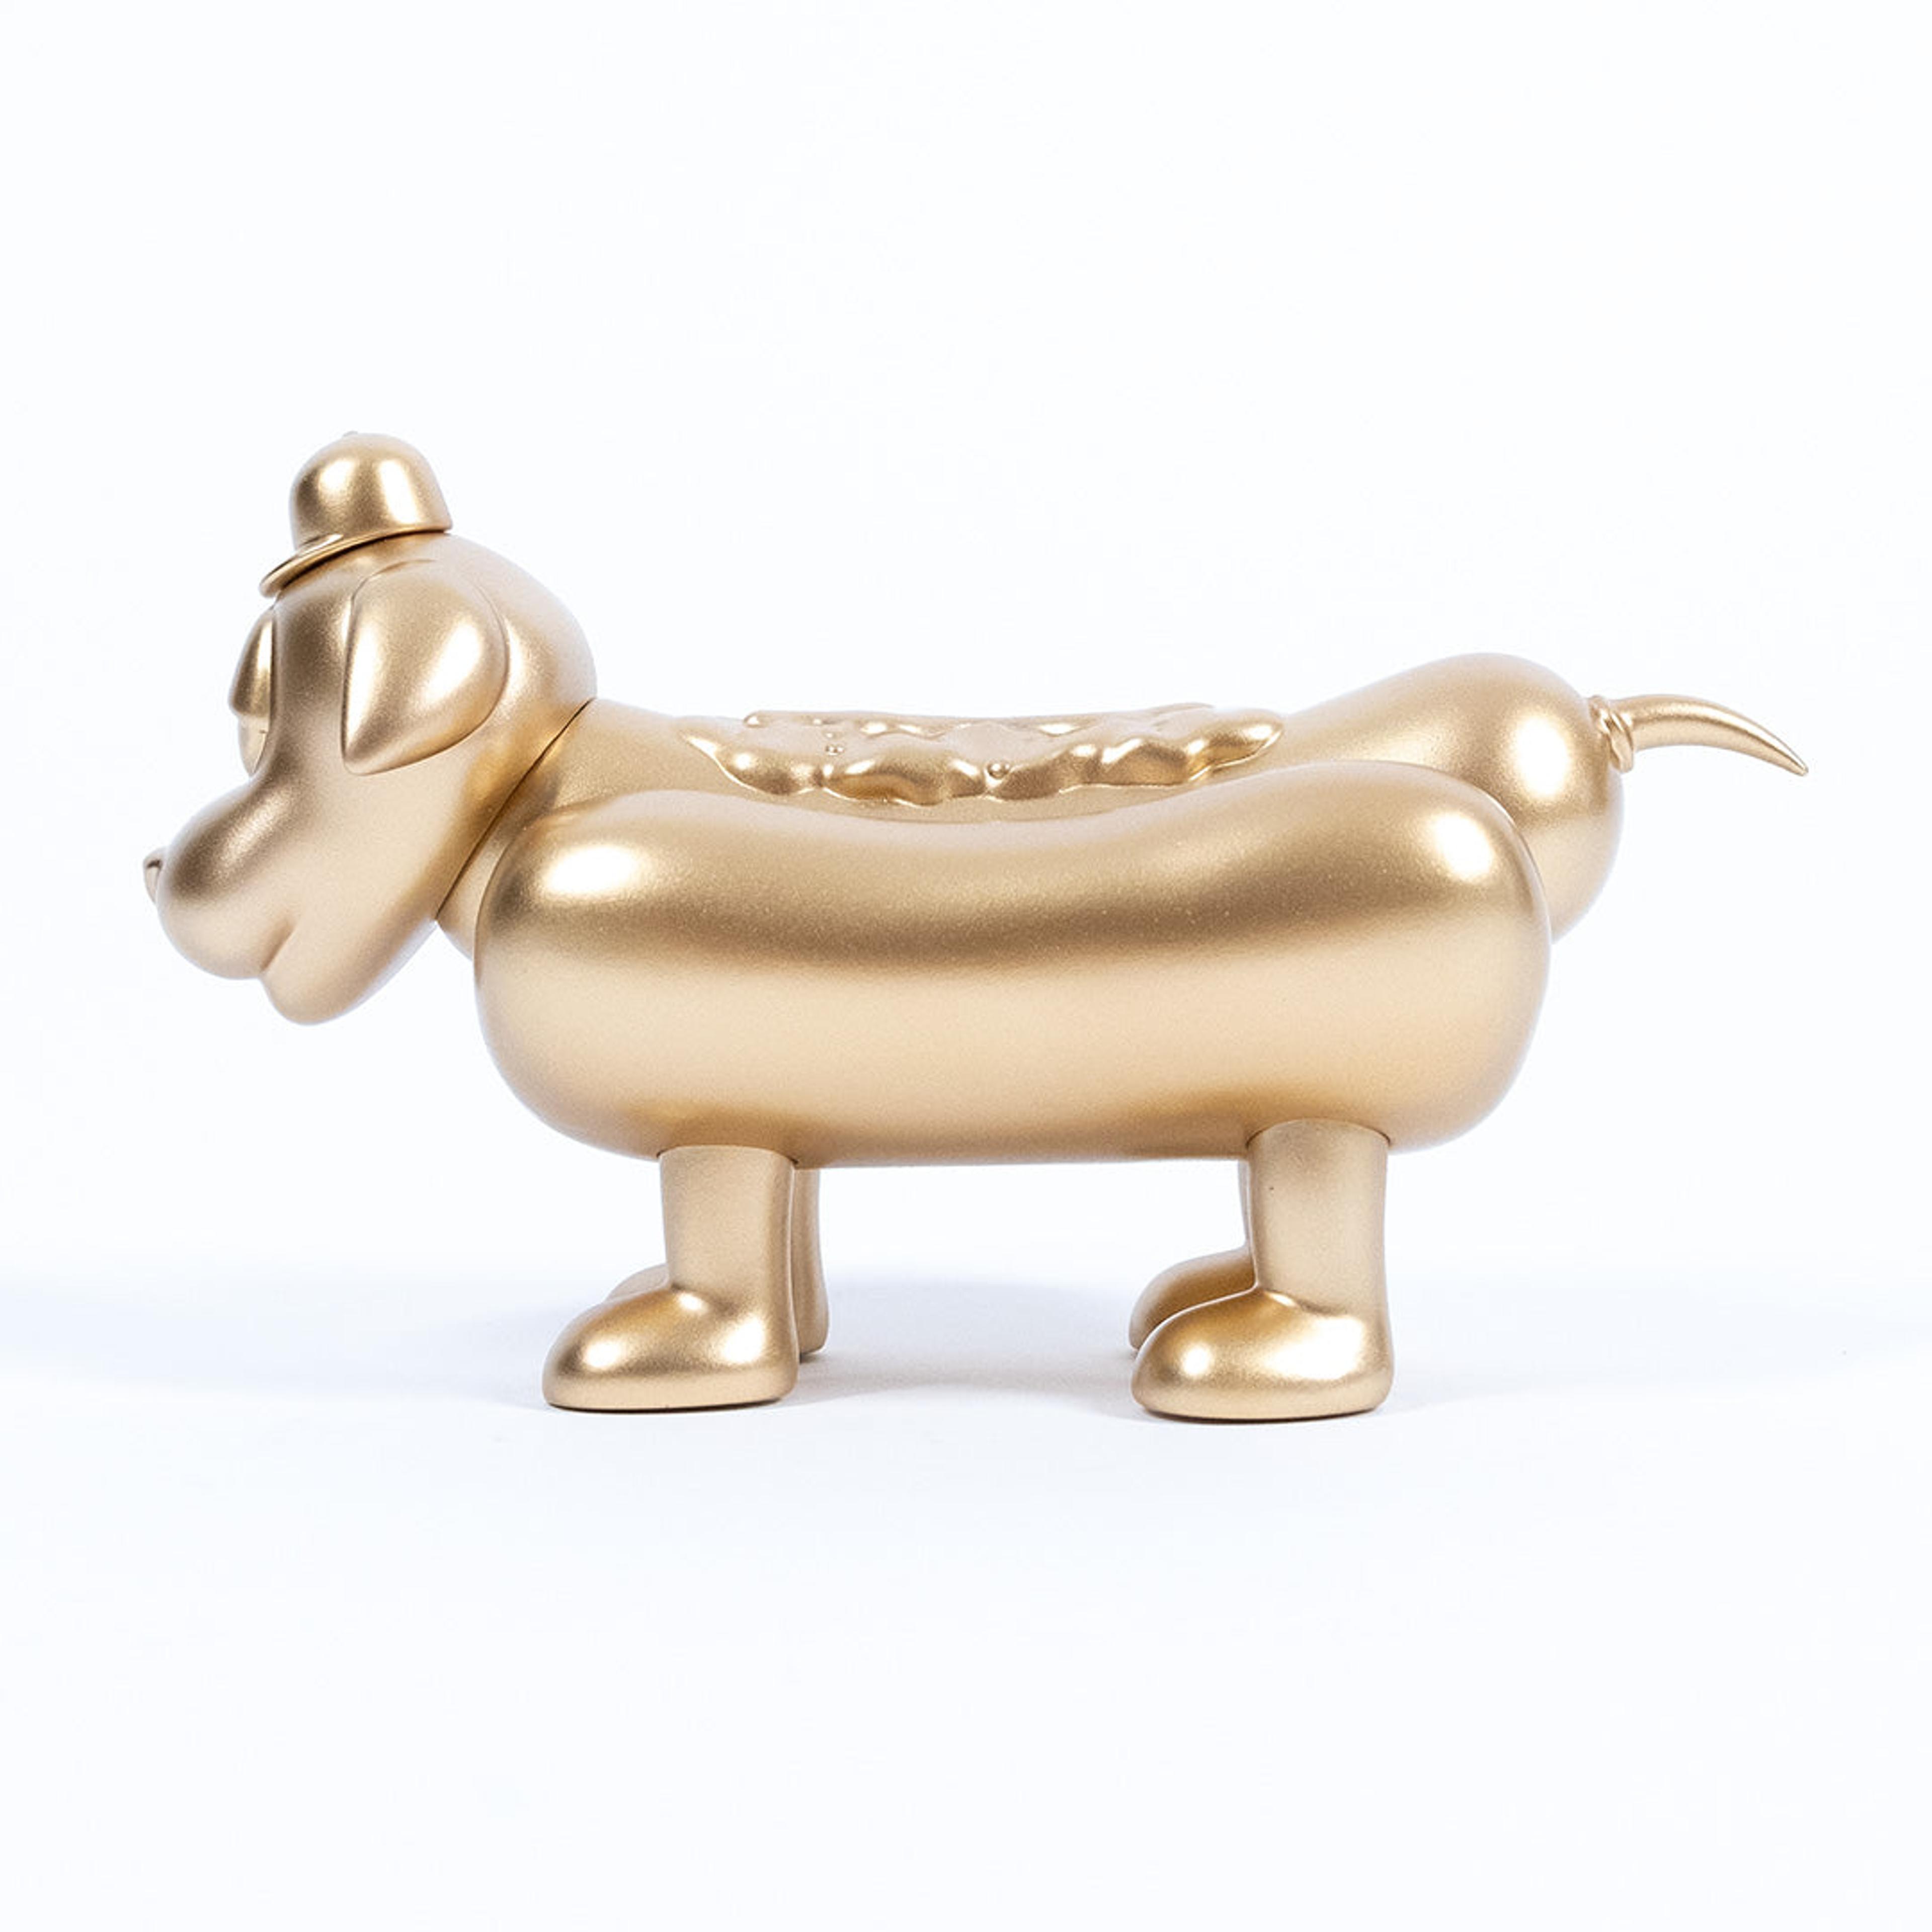 Alternate View 6 of Sheefy Coney Dog Sculpture - Gold